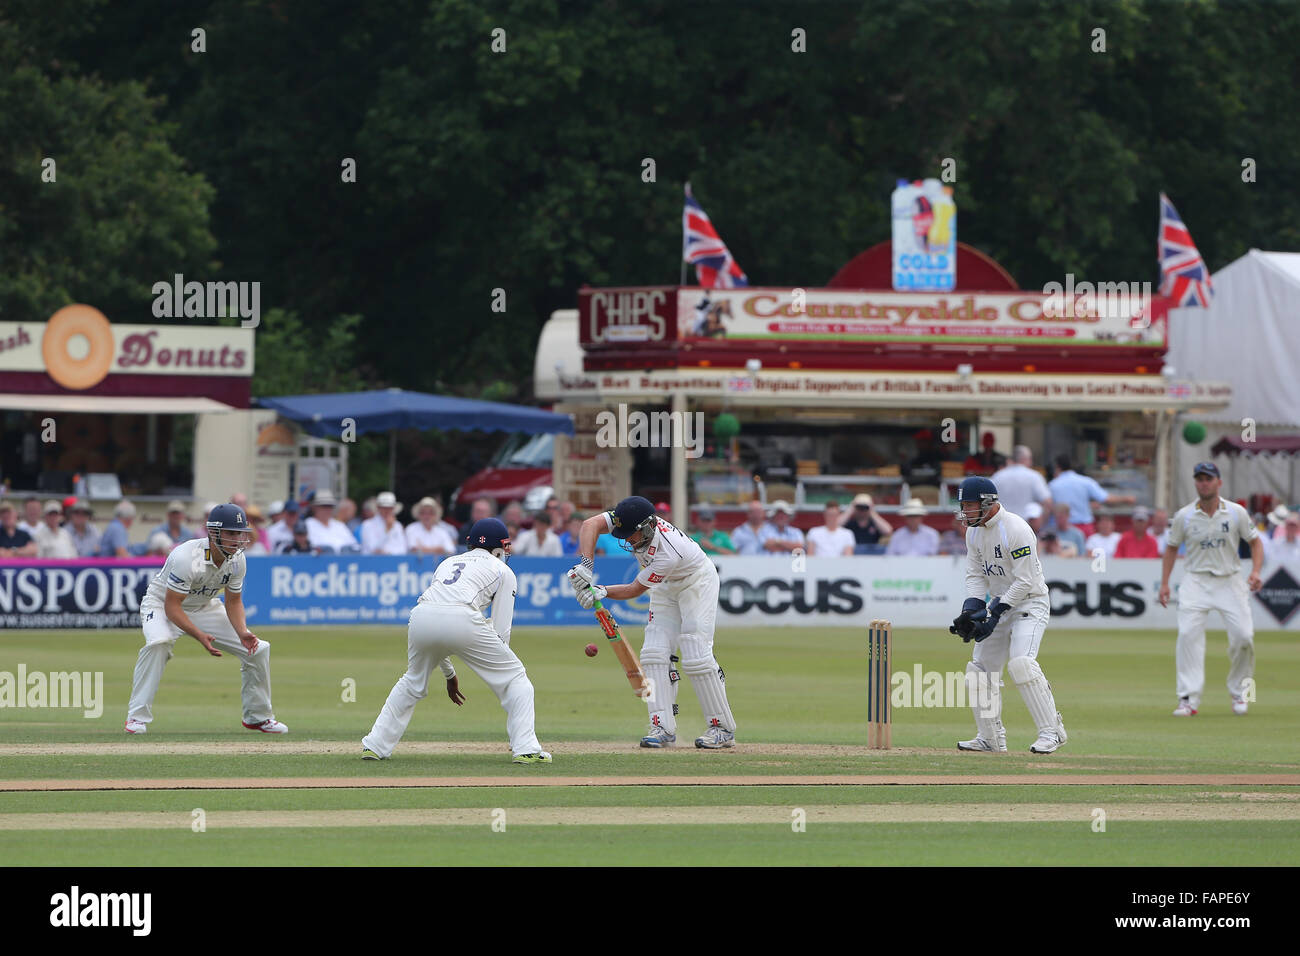 Genaral view of Sussex playing a cricket match at Horsham Cricket Club in West Sussex, Southern England. Stock Photo